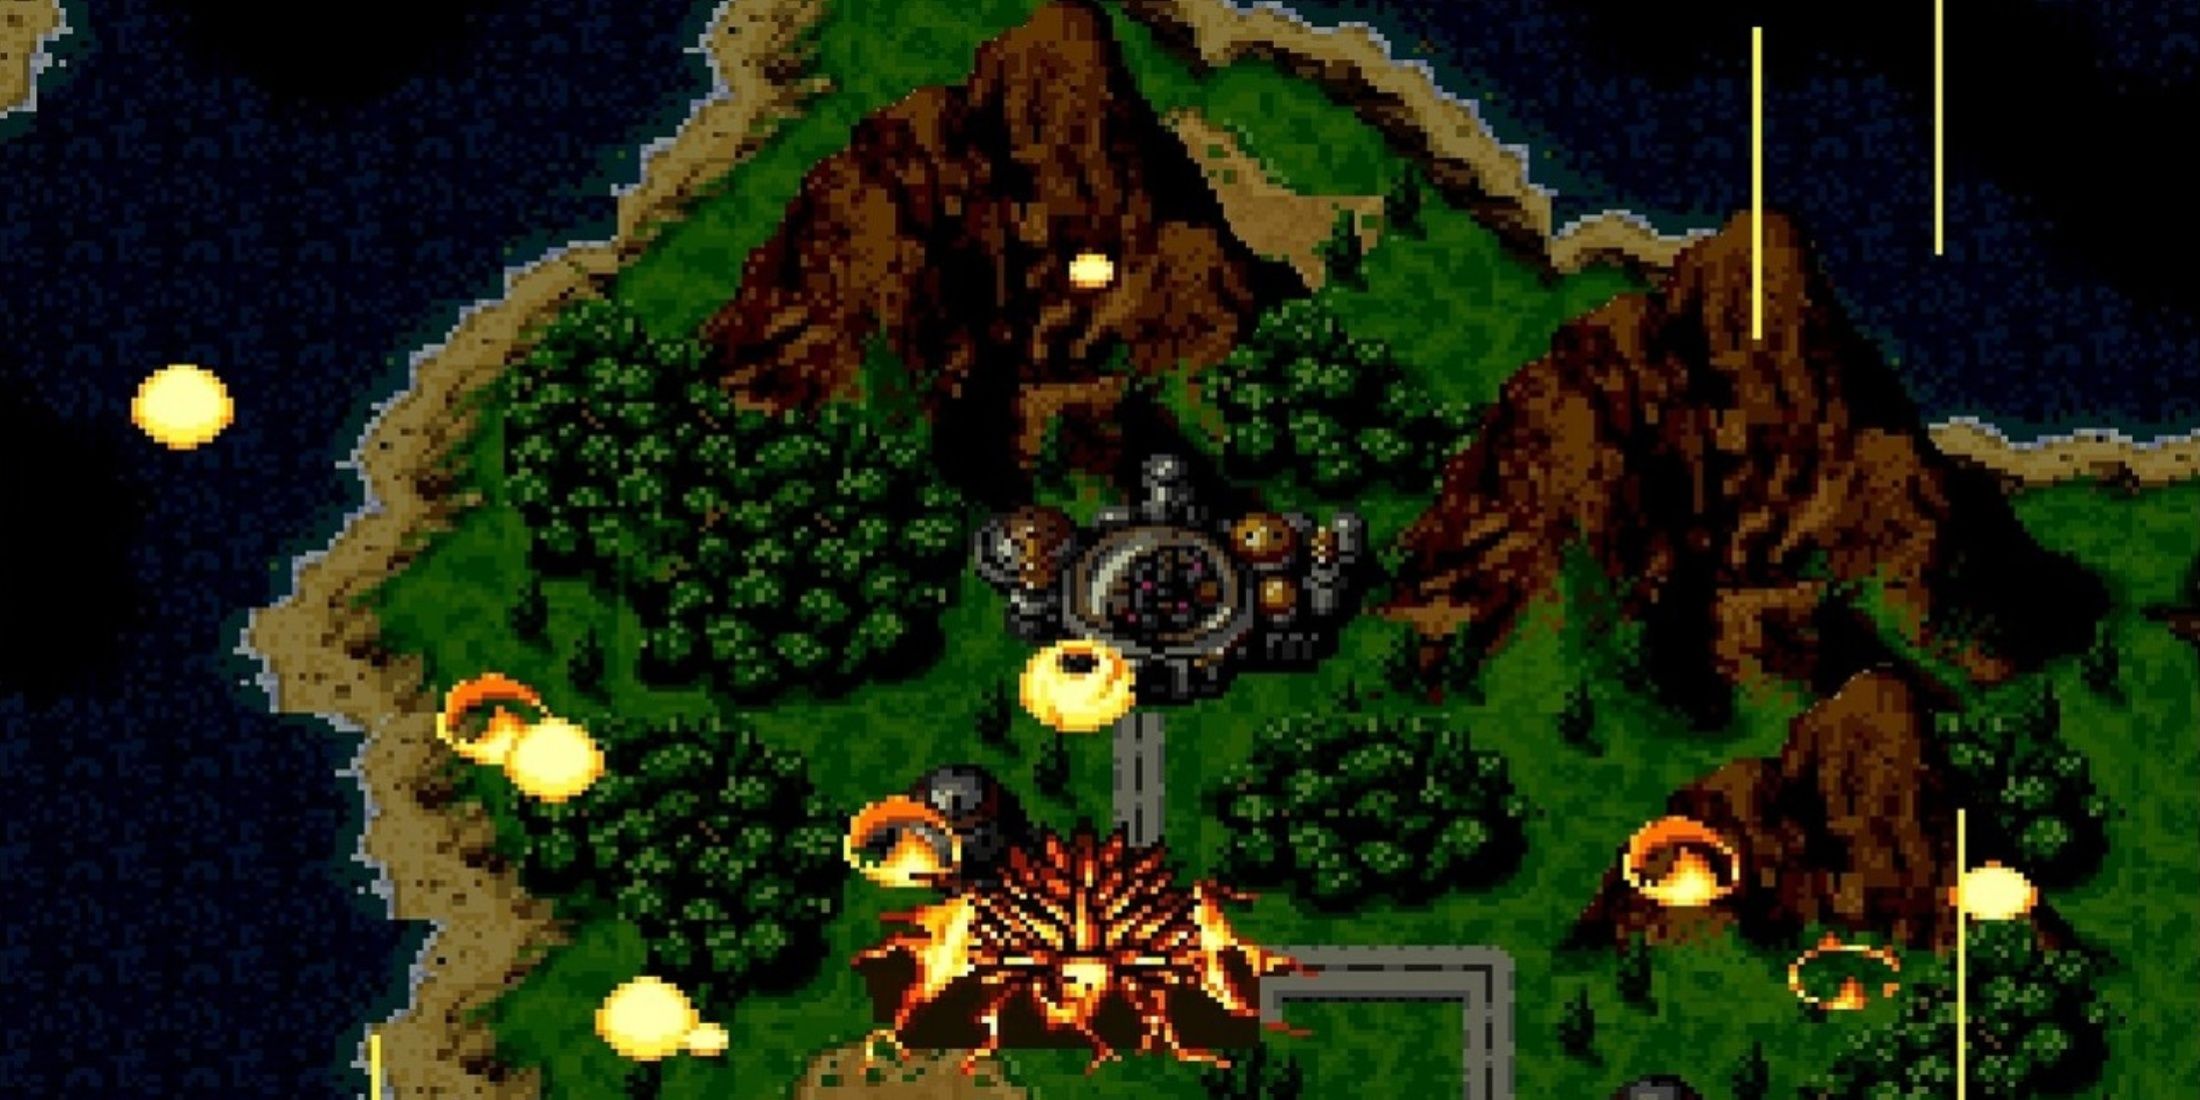 Chrono Trigger Is An Open-World Game With Science Fantasy Aspects